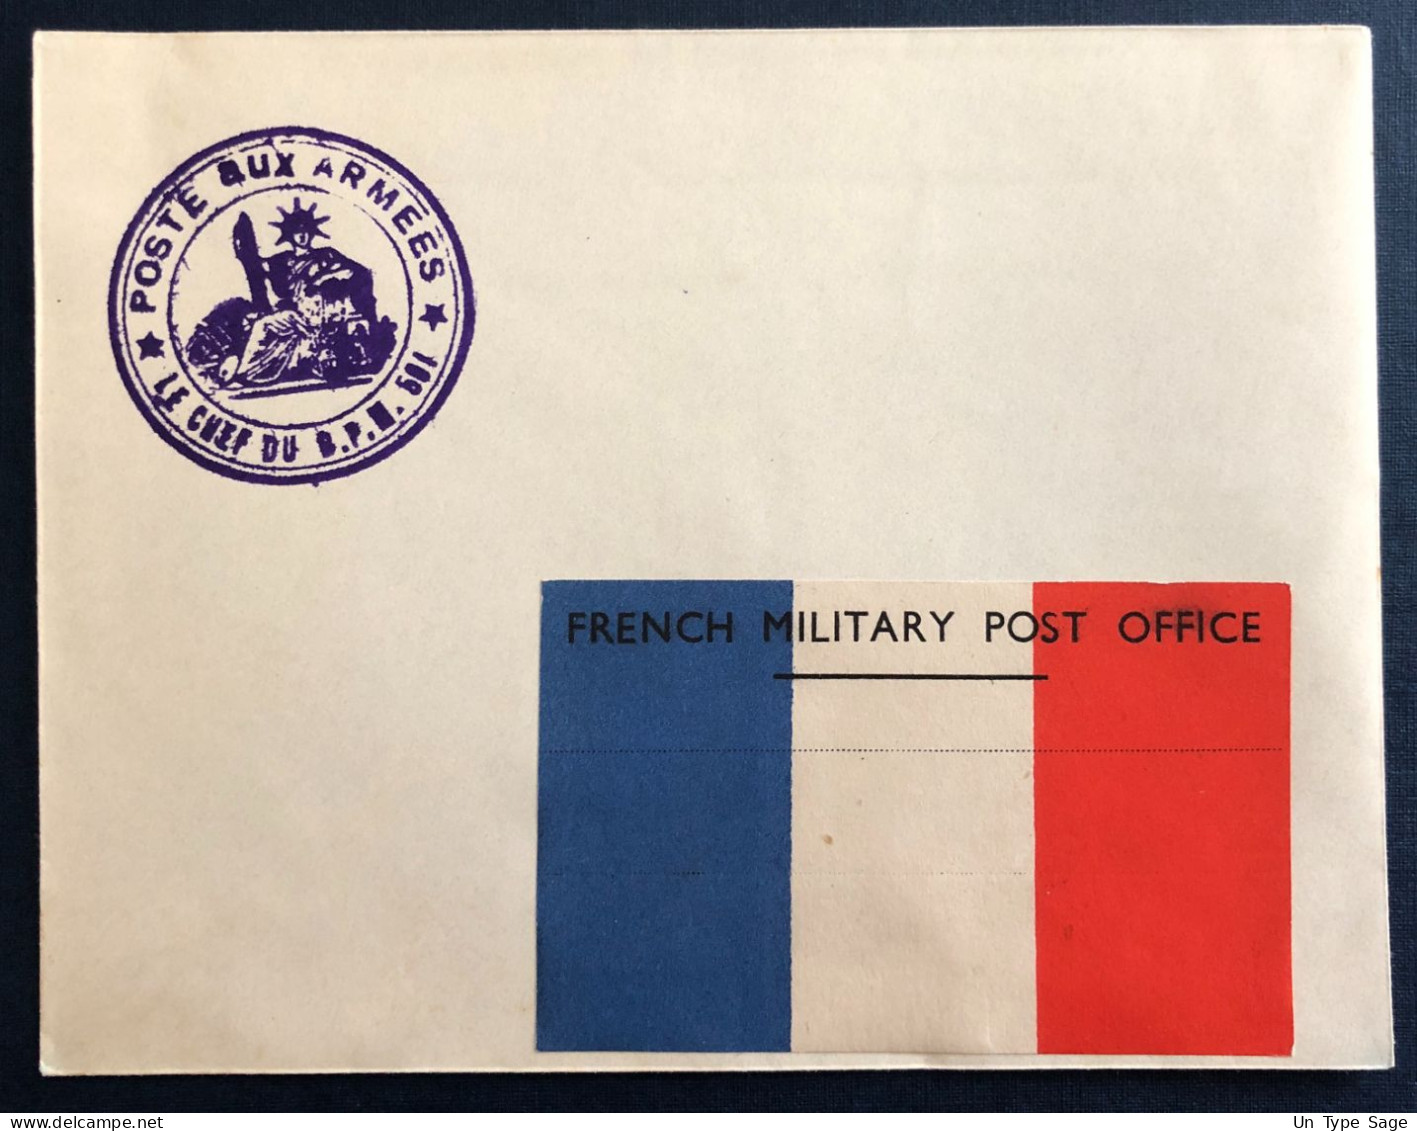 France Enveloppe Vierge FRENCH MILITARY POST OFFICE - (B3773) - Guerre De 1939-45